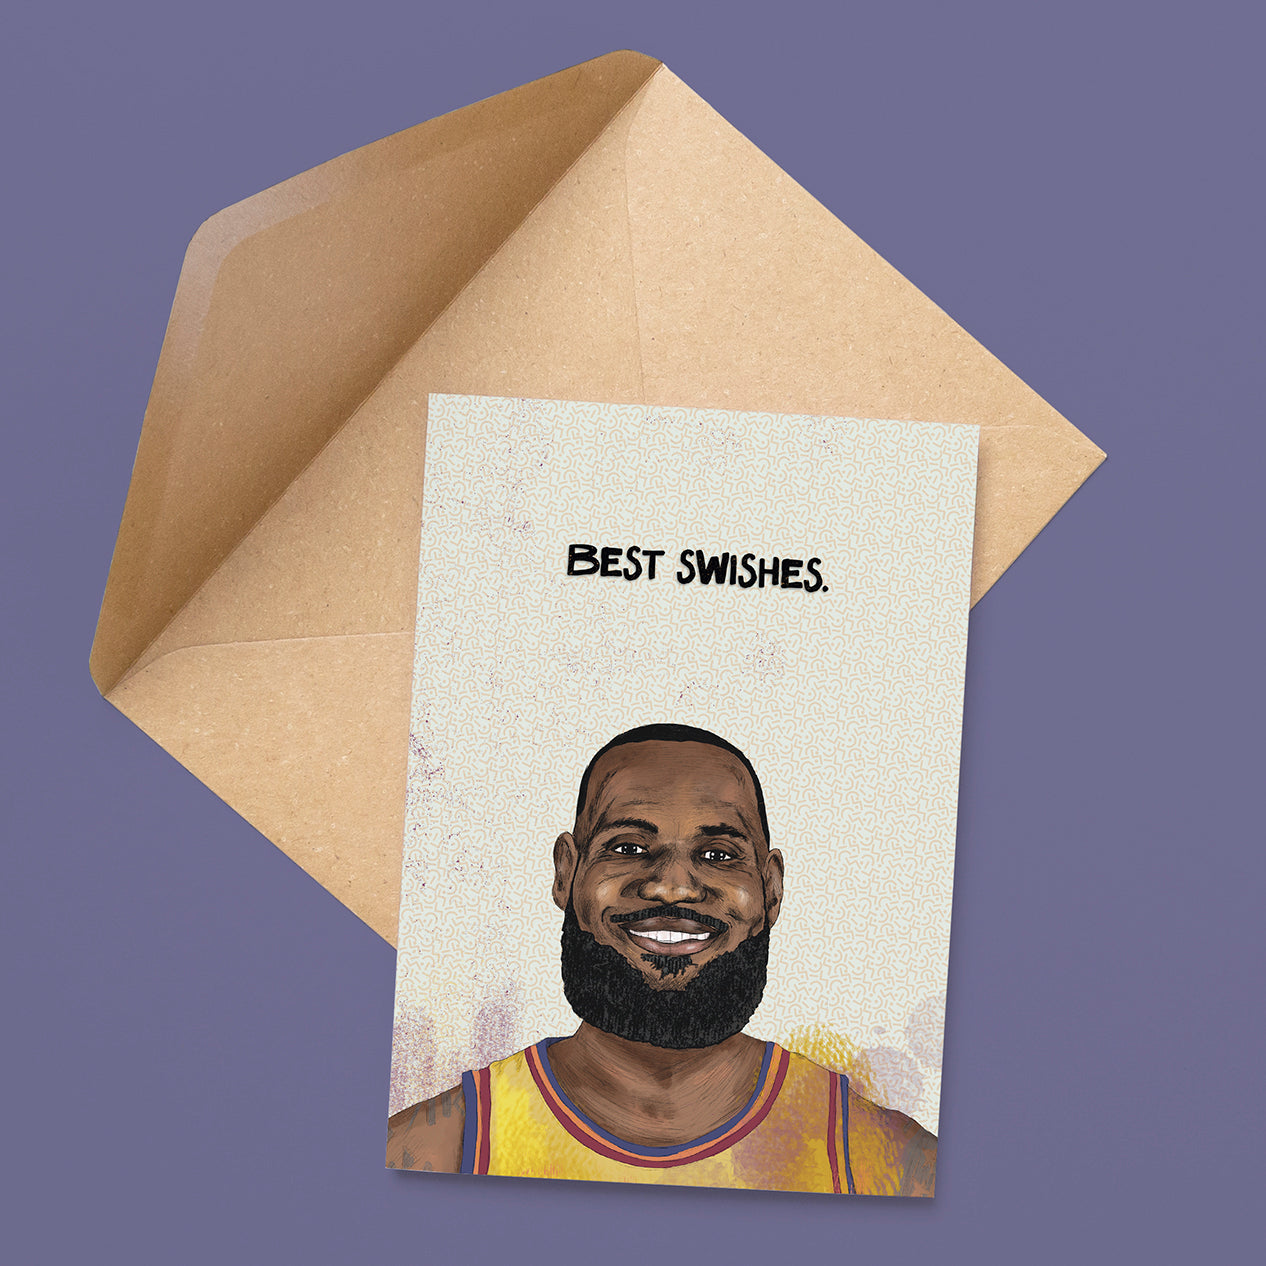 Best Swishes Card